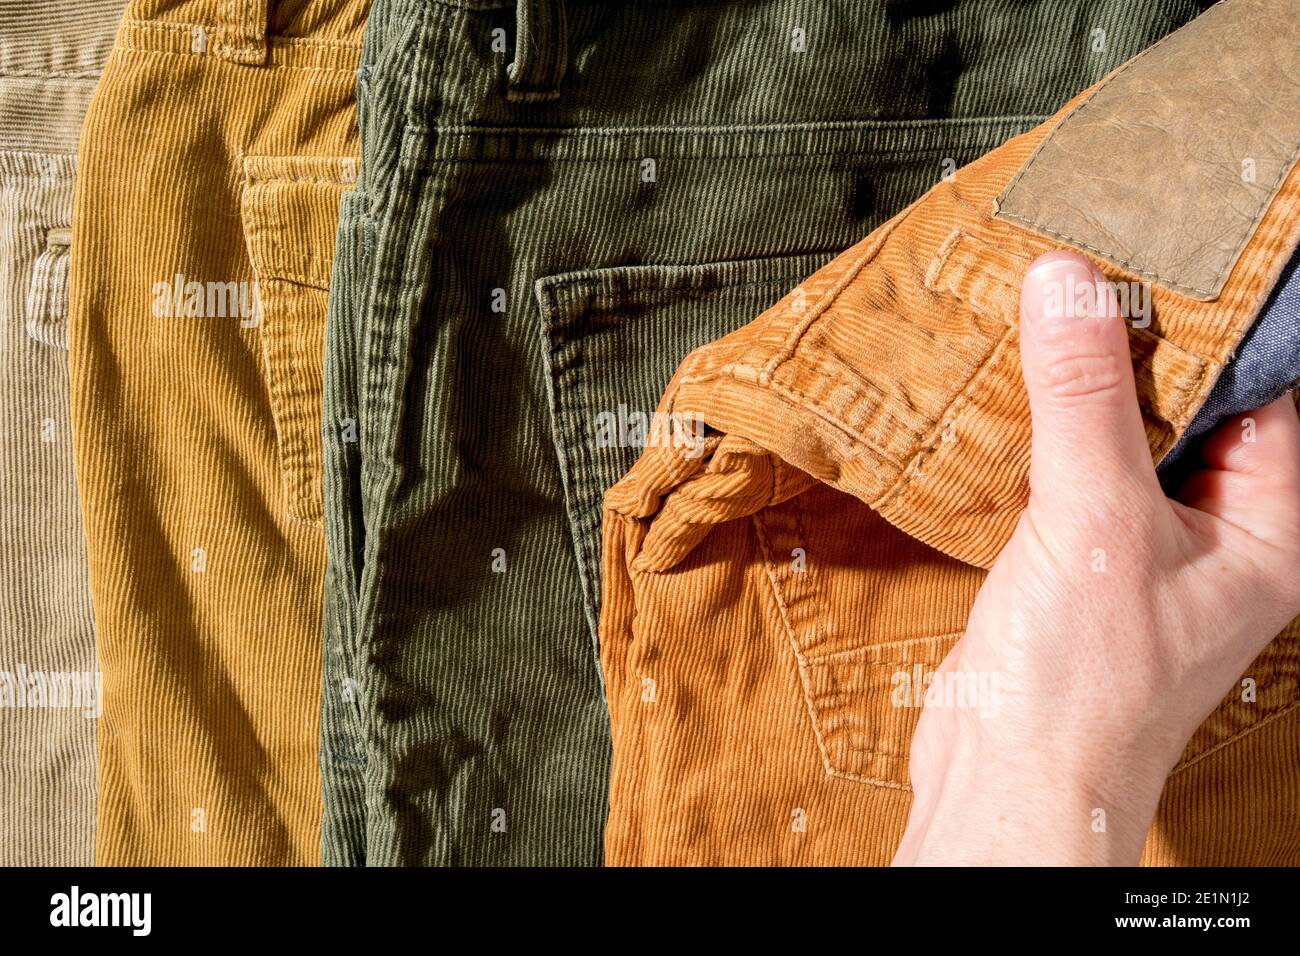 Hand grabs corduroy trousers, on sale. Shopping.  Stock Photo